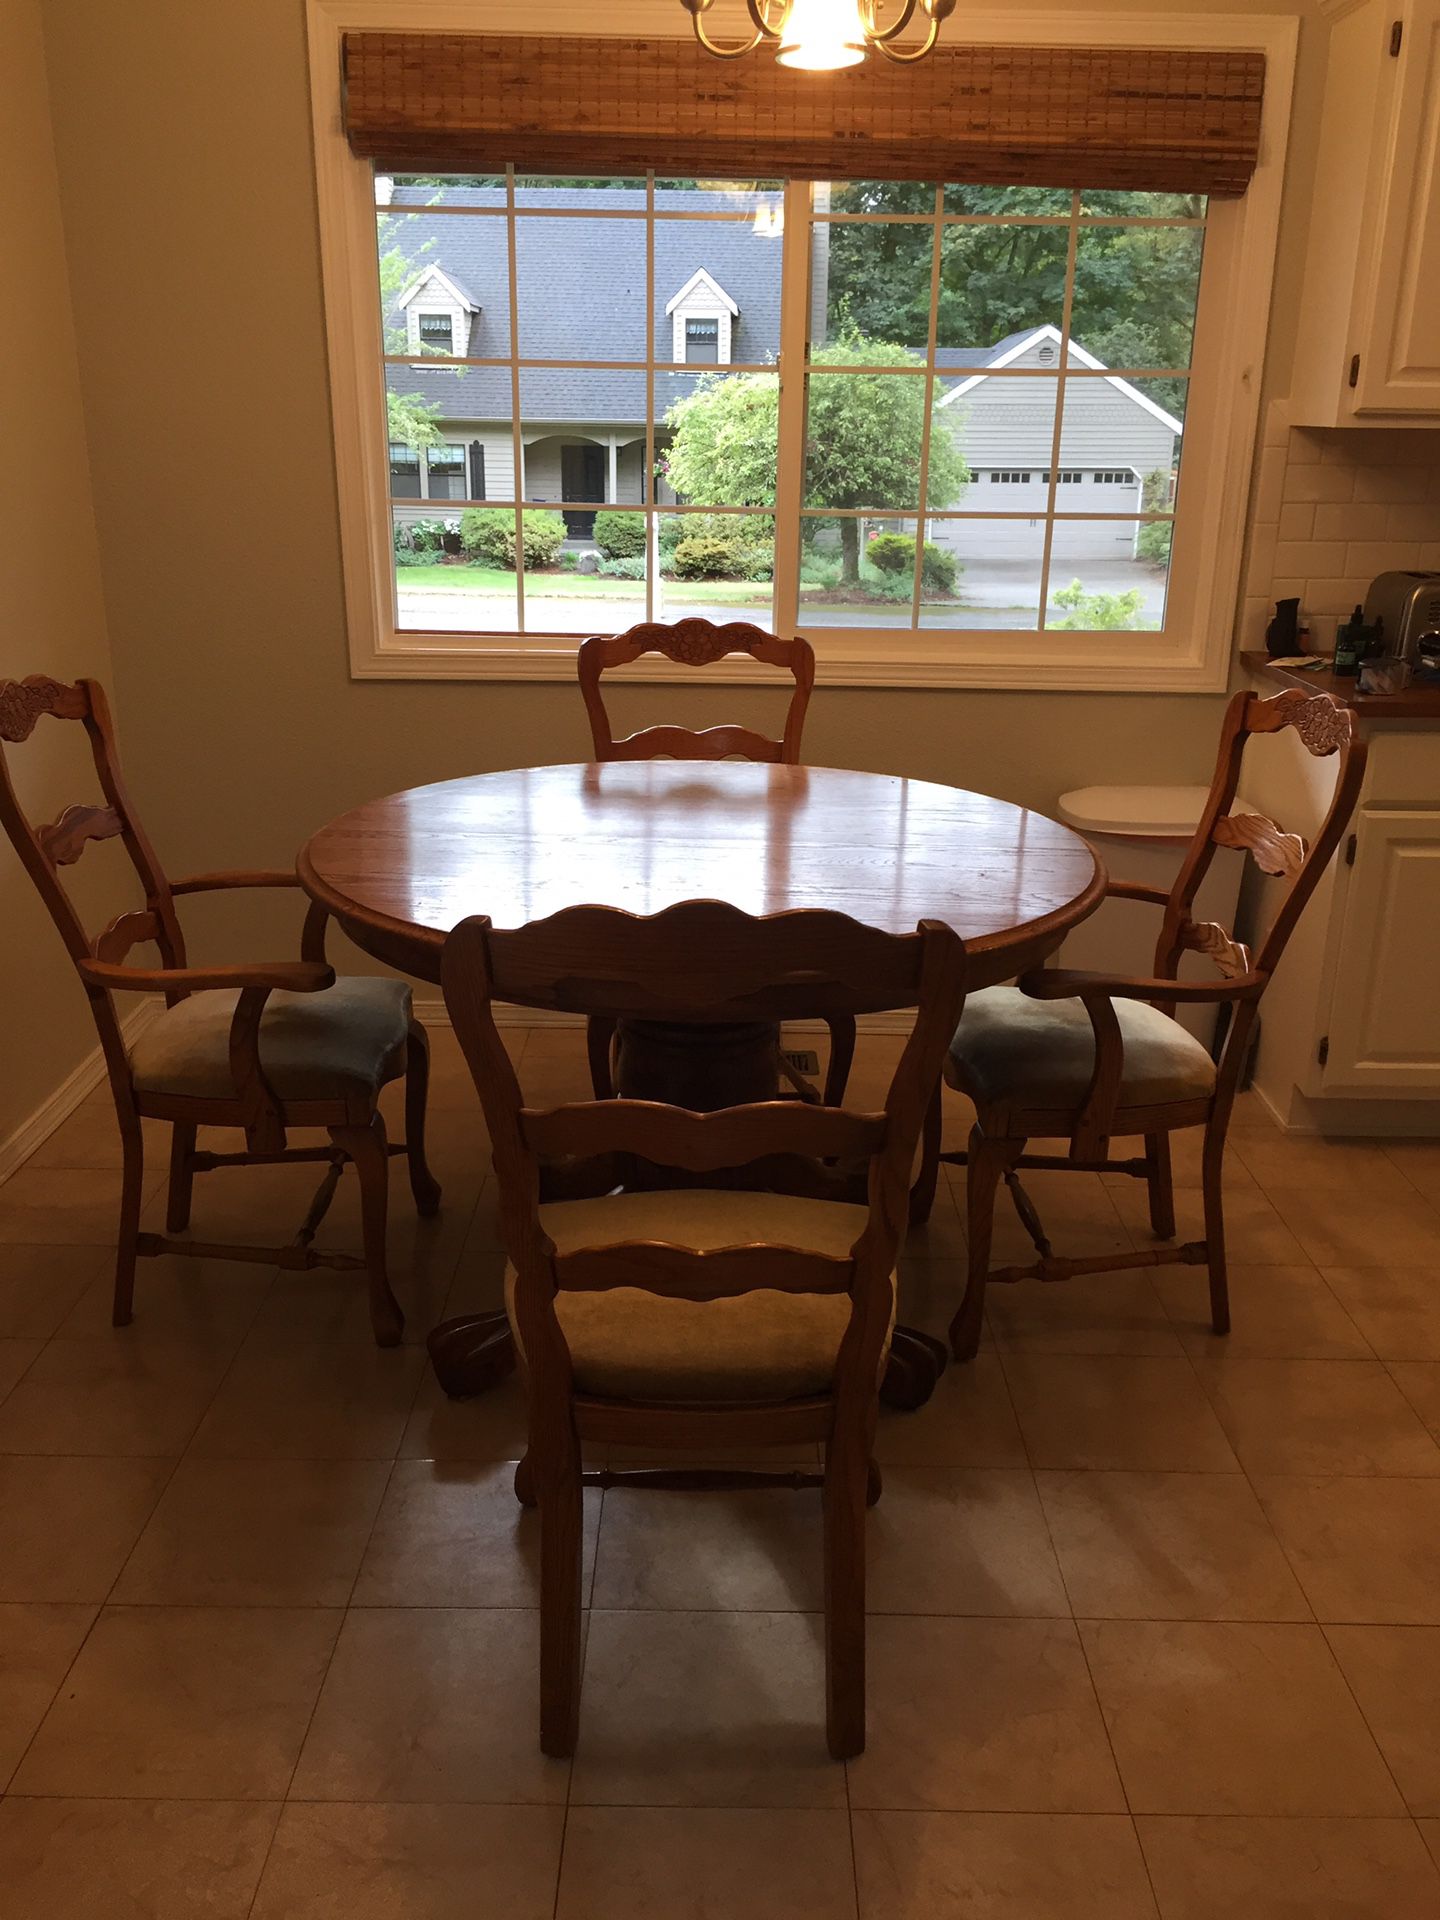 Solid oak kitchen or dining room table with 6 chairs and leaf. Diameter is 48”. Height is 32” and the leaf is 24” x 48”.